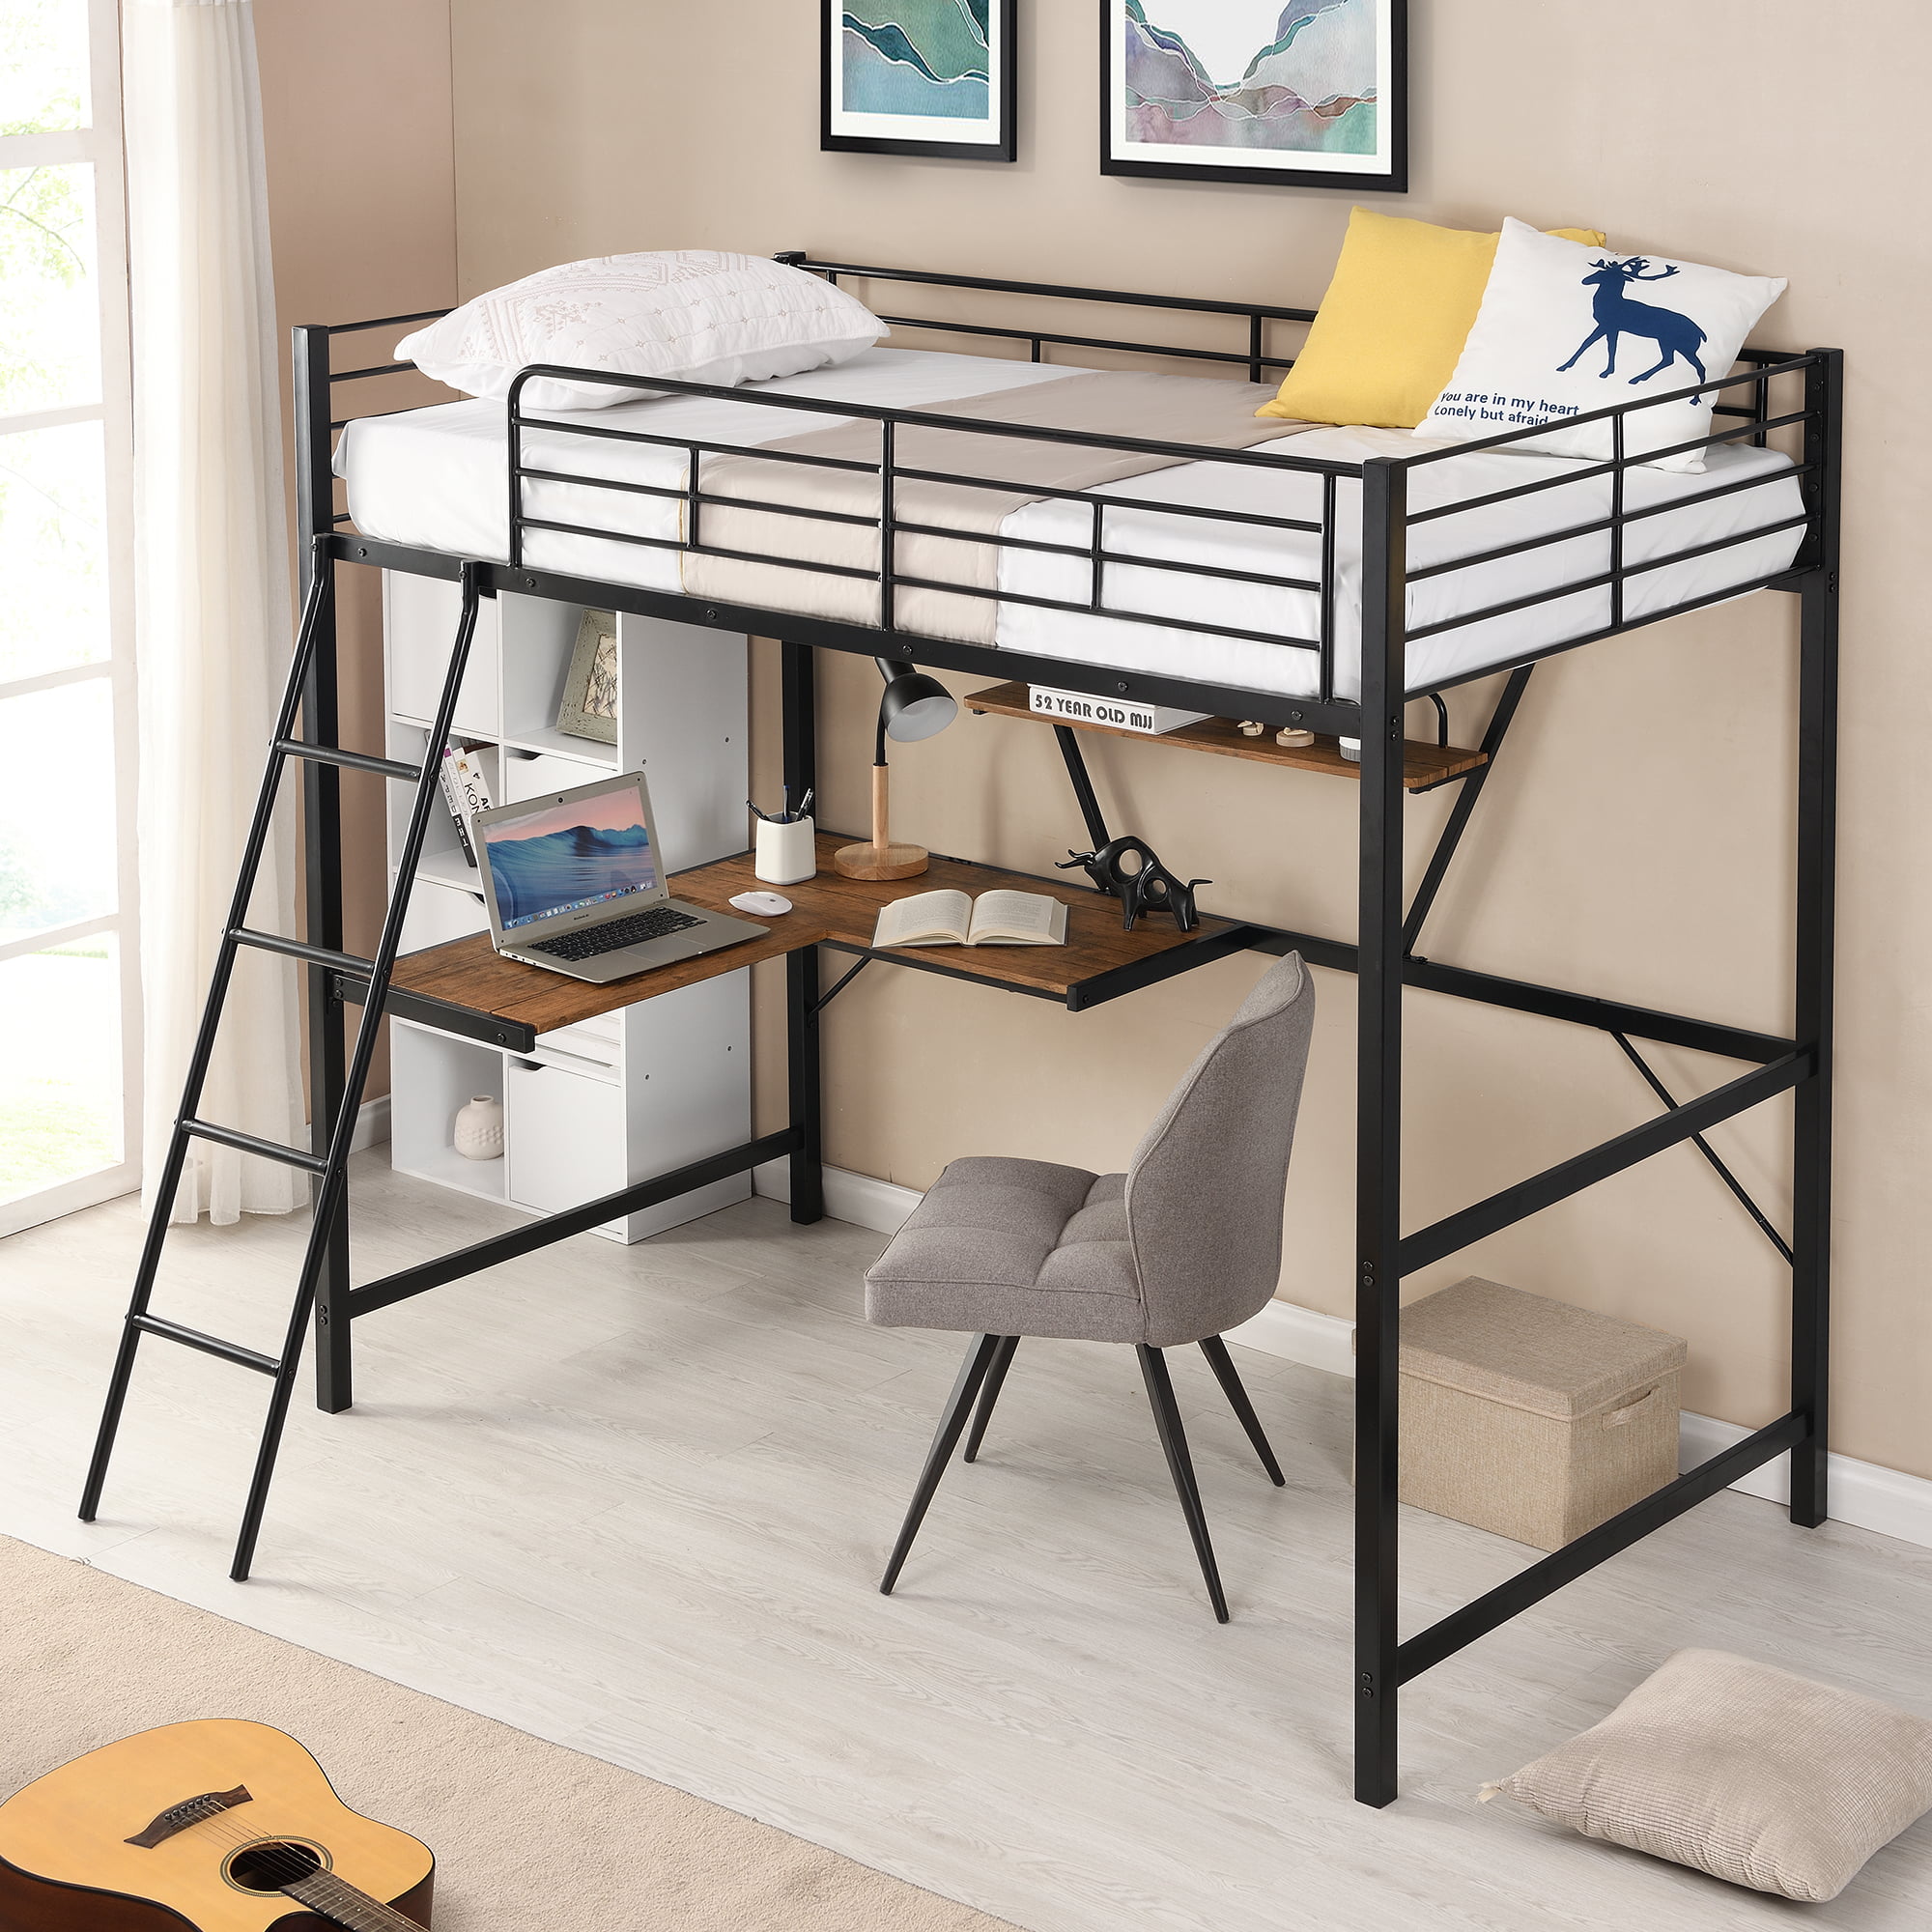 Tophomer Twin Size Loft Bed Metal, Twin Size Loft Bed With Desk And Storage